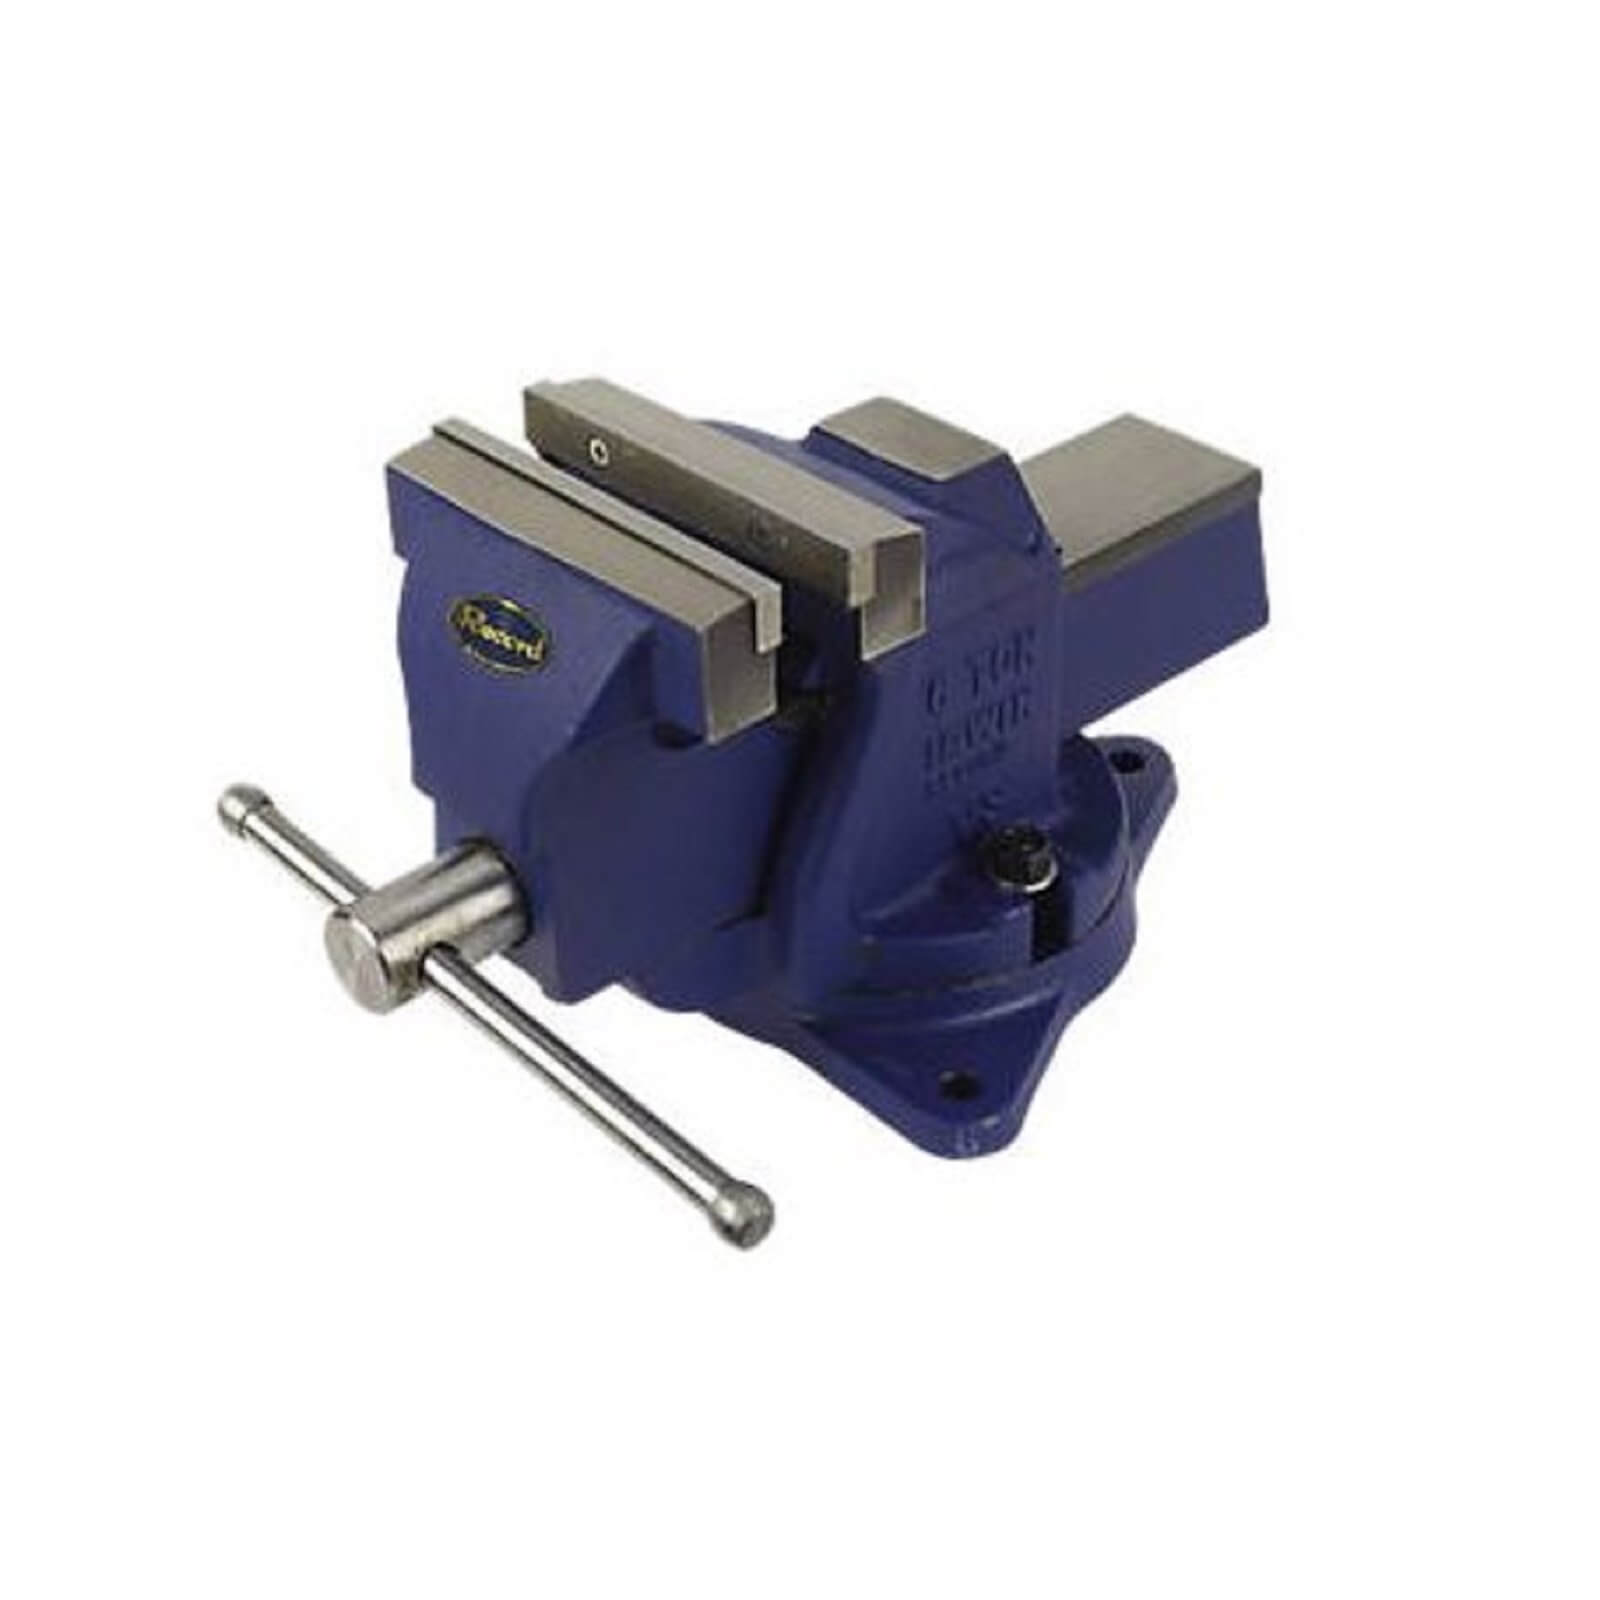 Irwin Record Workshop Vice with Swivel - 100mm 4in